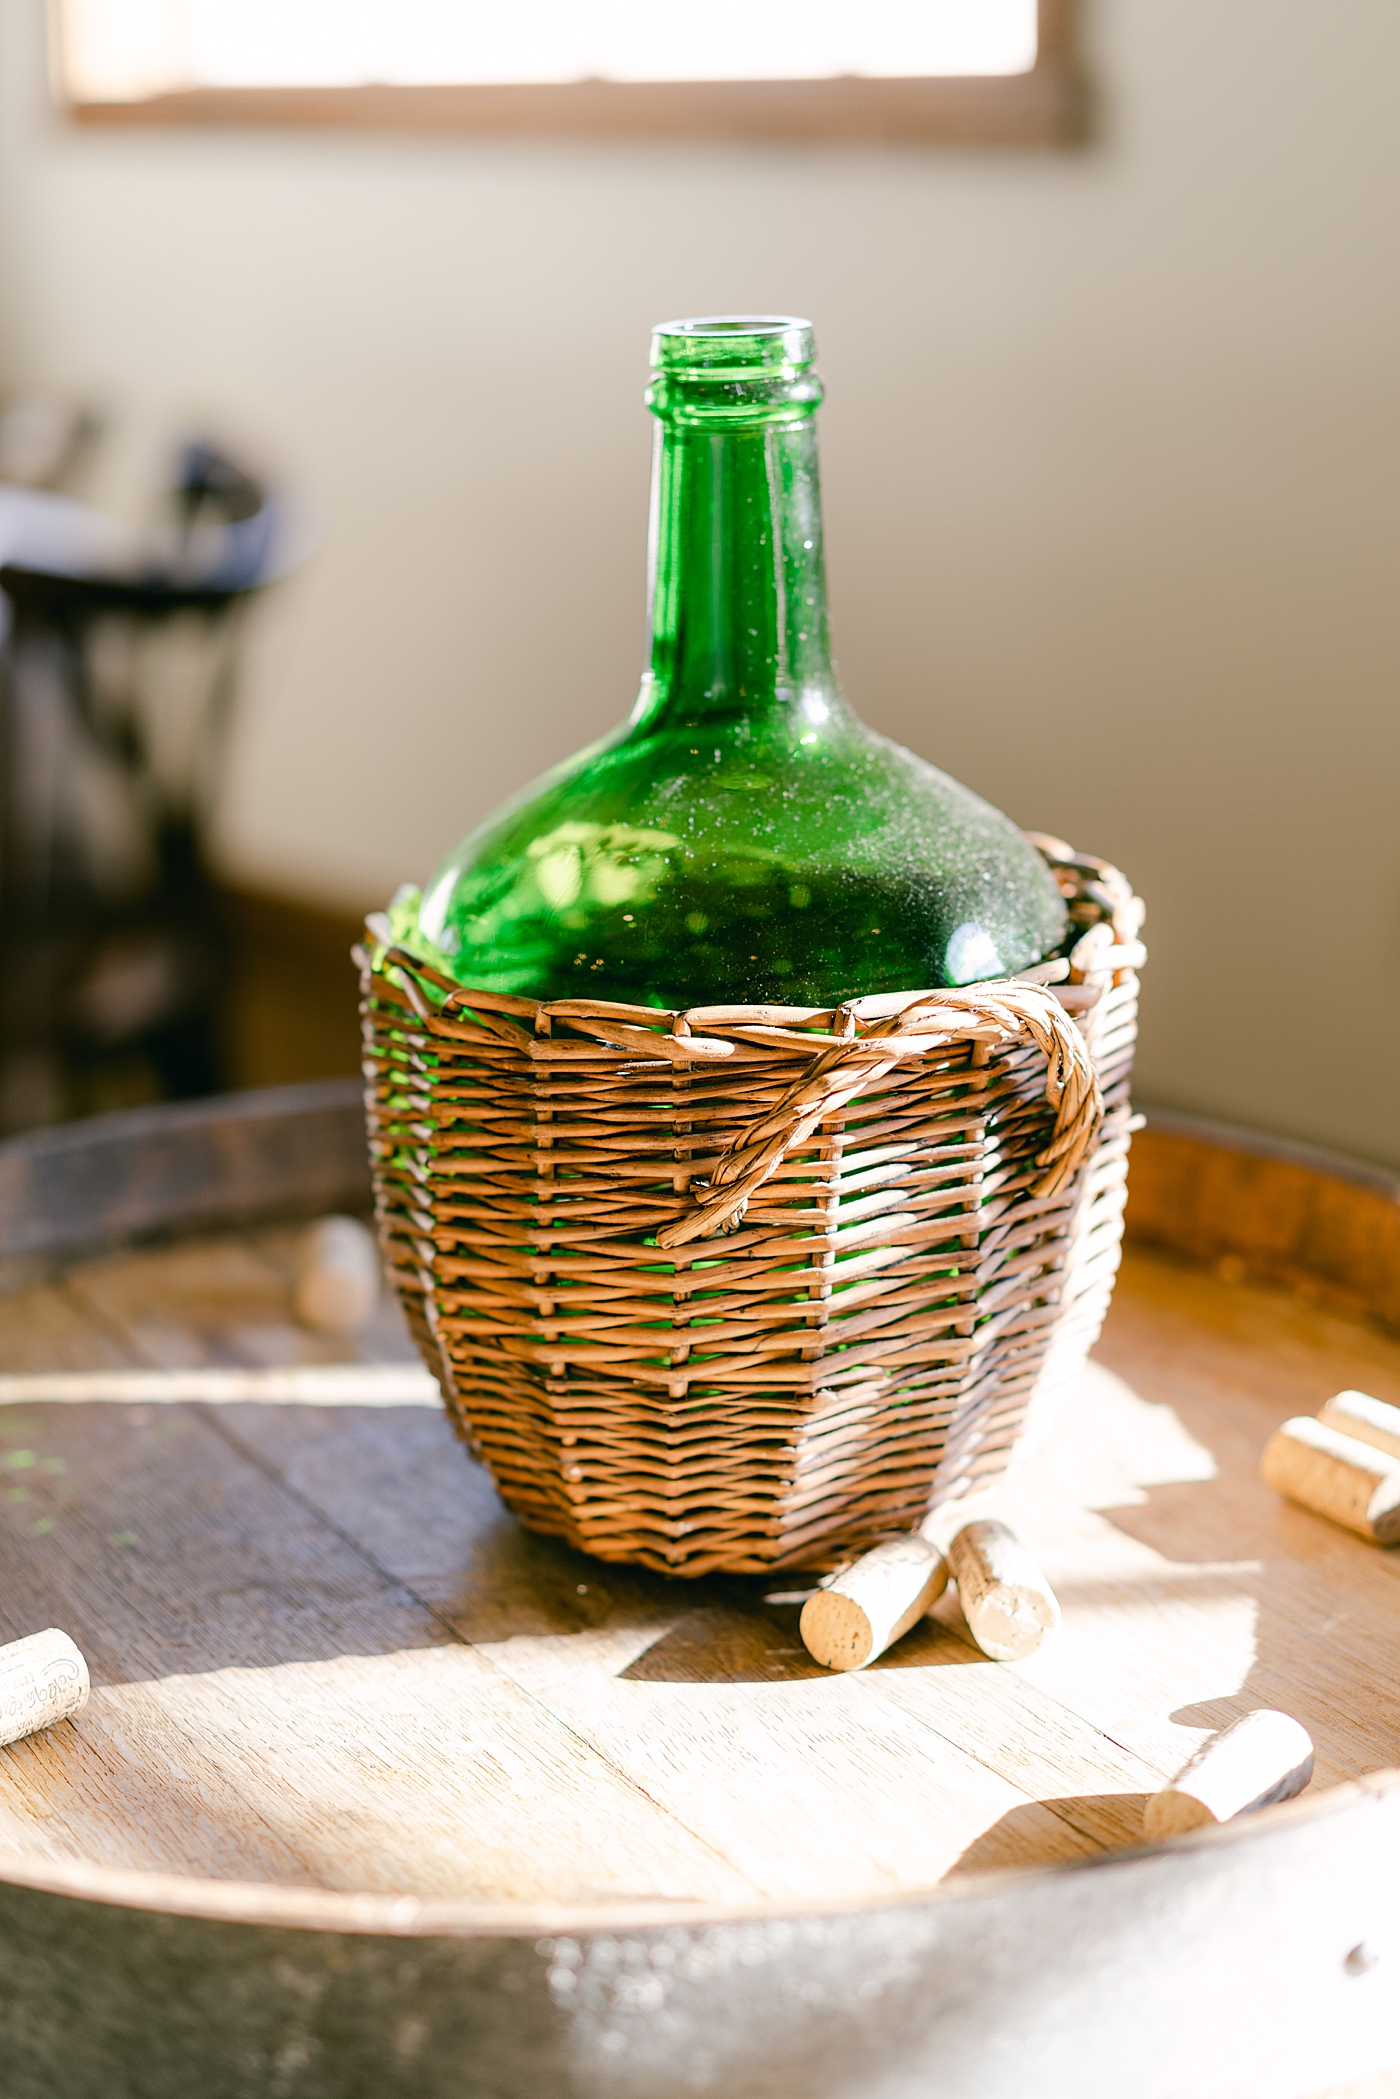 Big green wine decanter | Photo by Hope Helmuth Photography